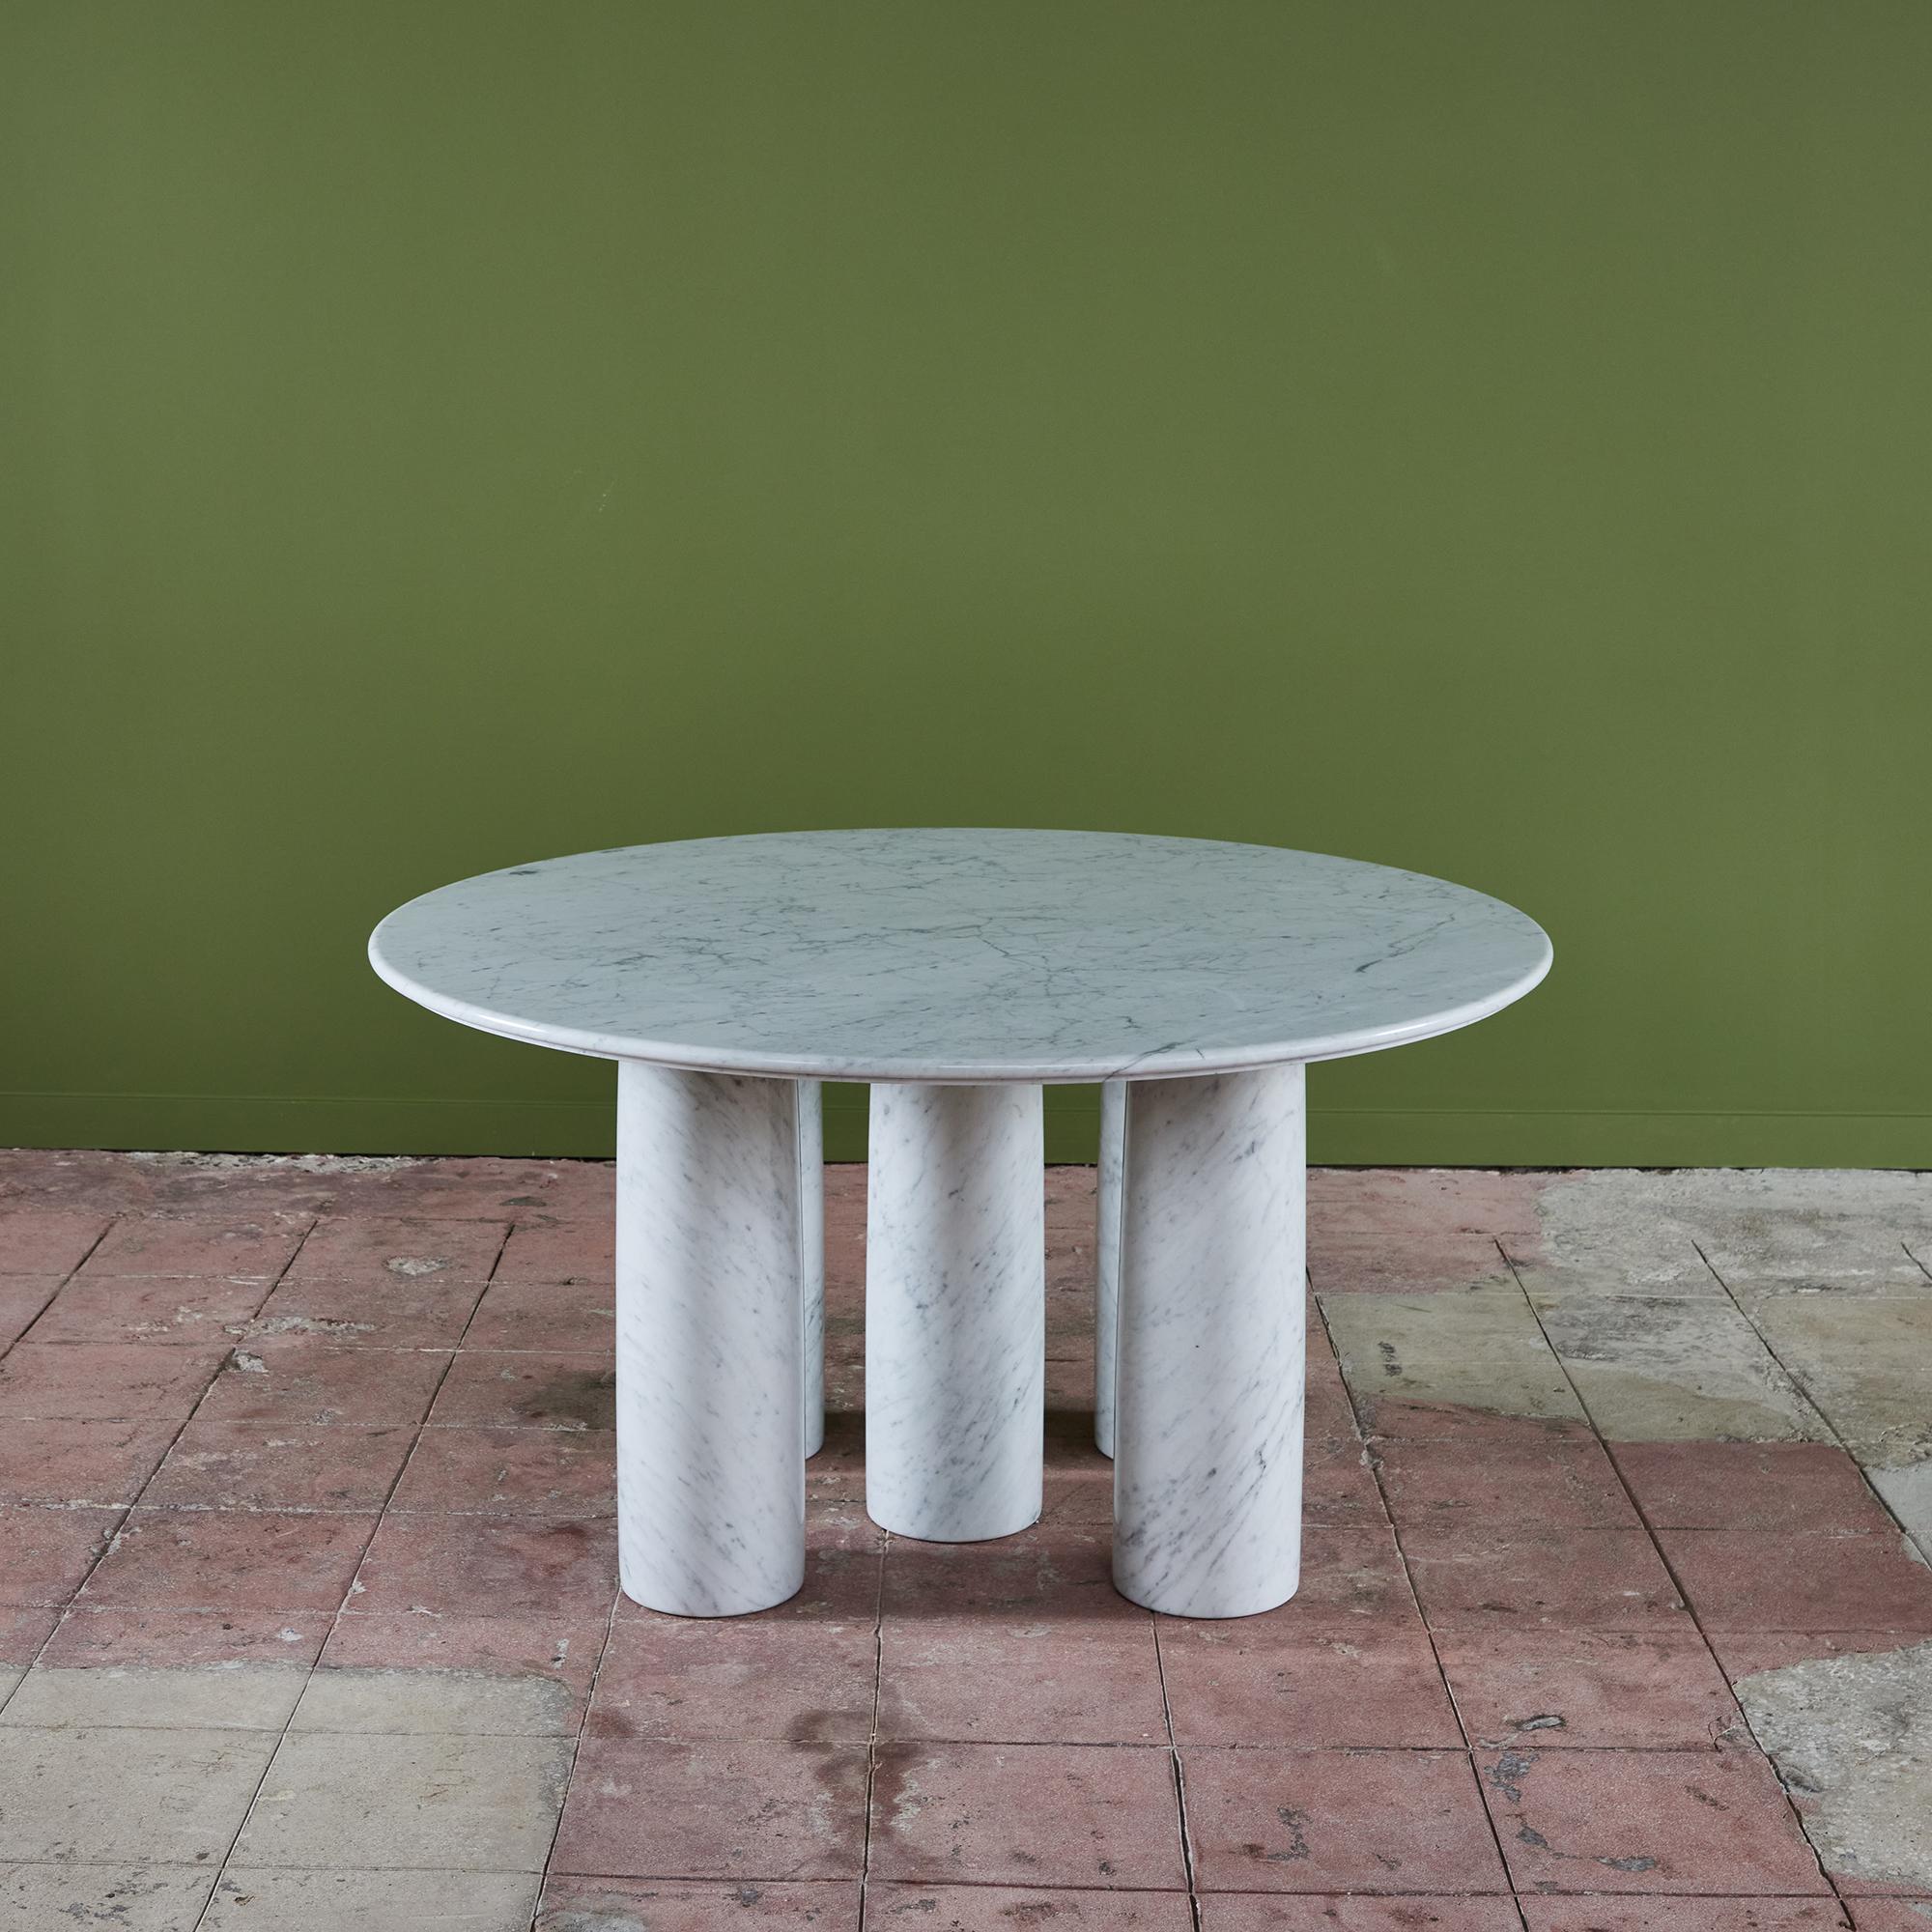 'Il Colonnato' round dining table in Carrara marble by Mario Bellini for Cassina. The table features a thick round white marble top with distinct gray veining. There are five thick column legs that support the tabletop. Bellini designed the table in